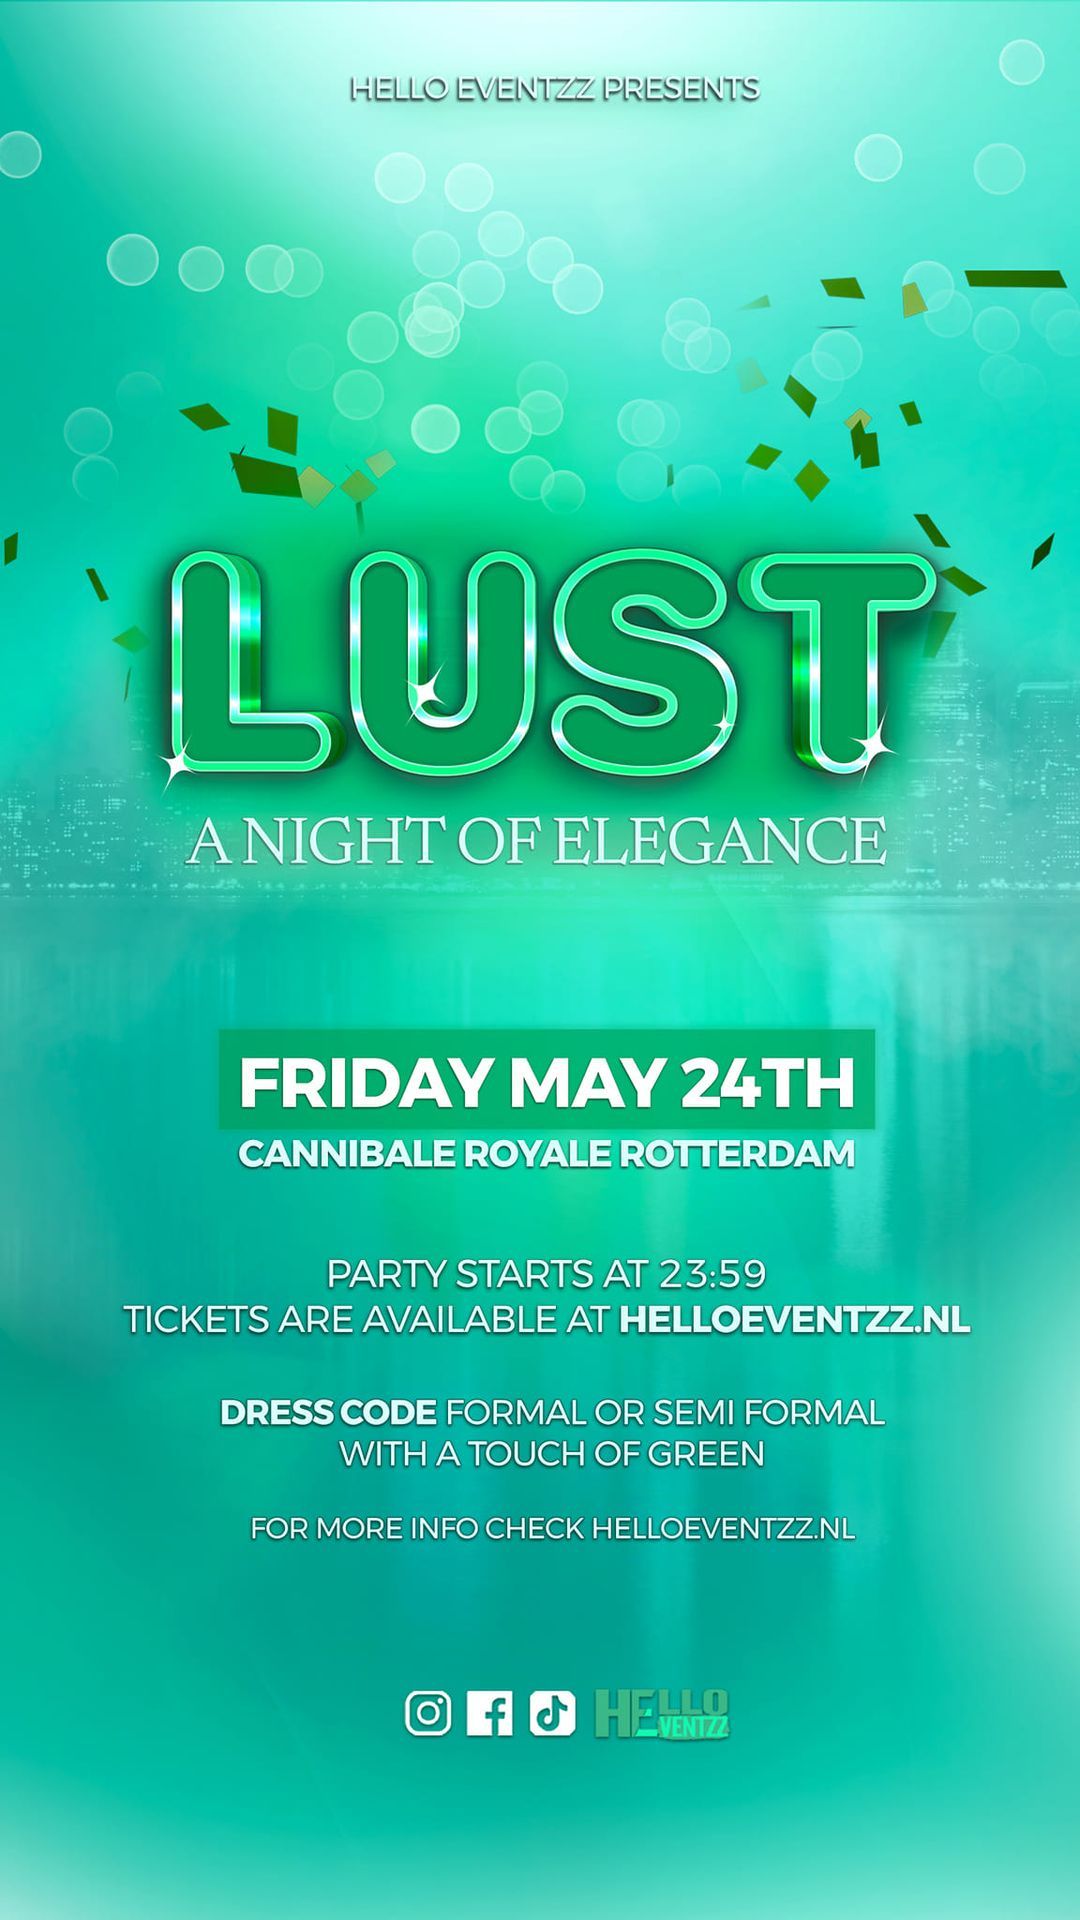 Lust - A Night of Elegance; A touch of Green